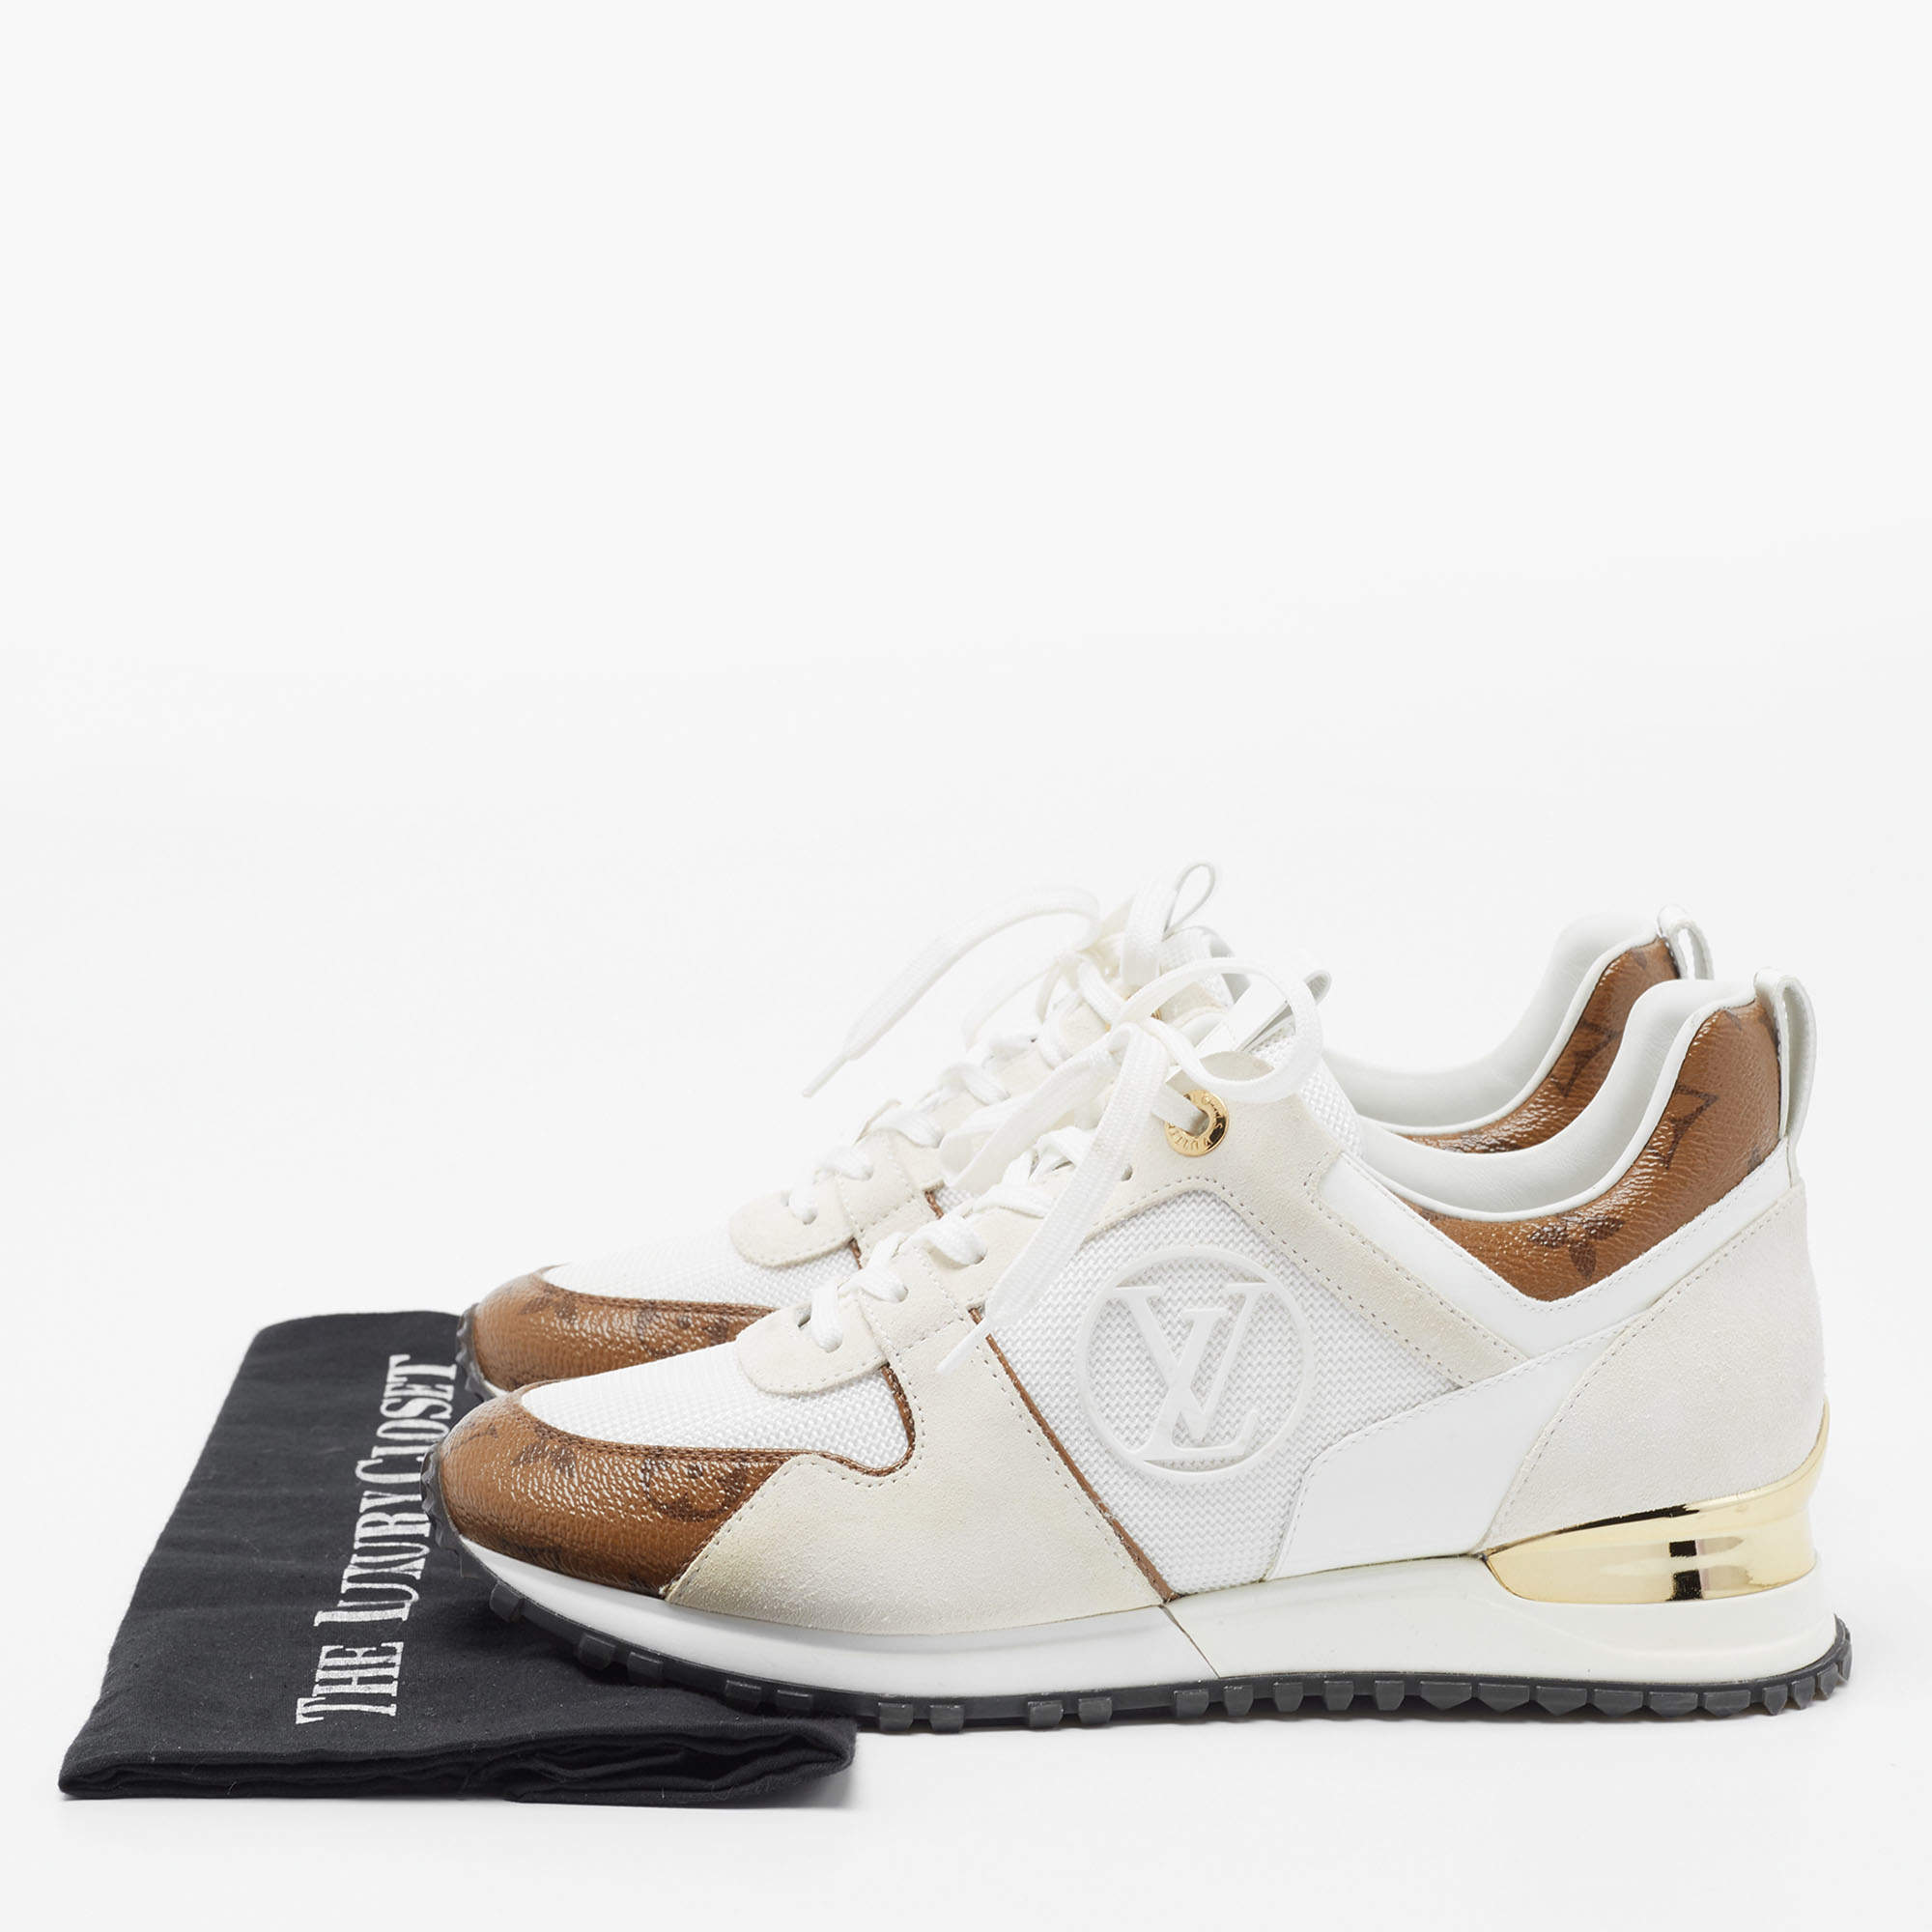 Run away leather trainers Louis Vuitton White size 38 EU in Leather -  25837828